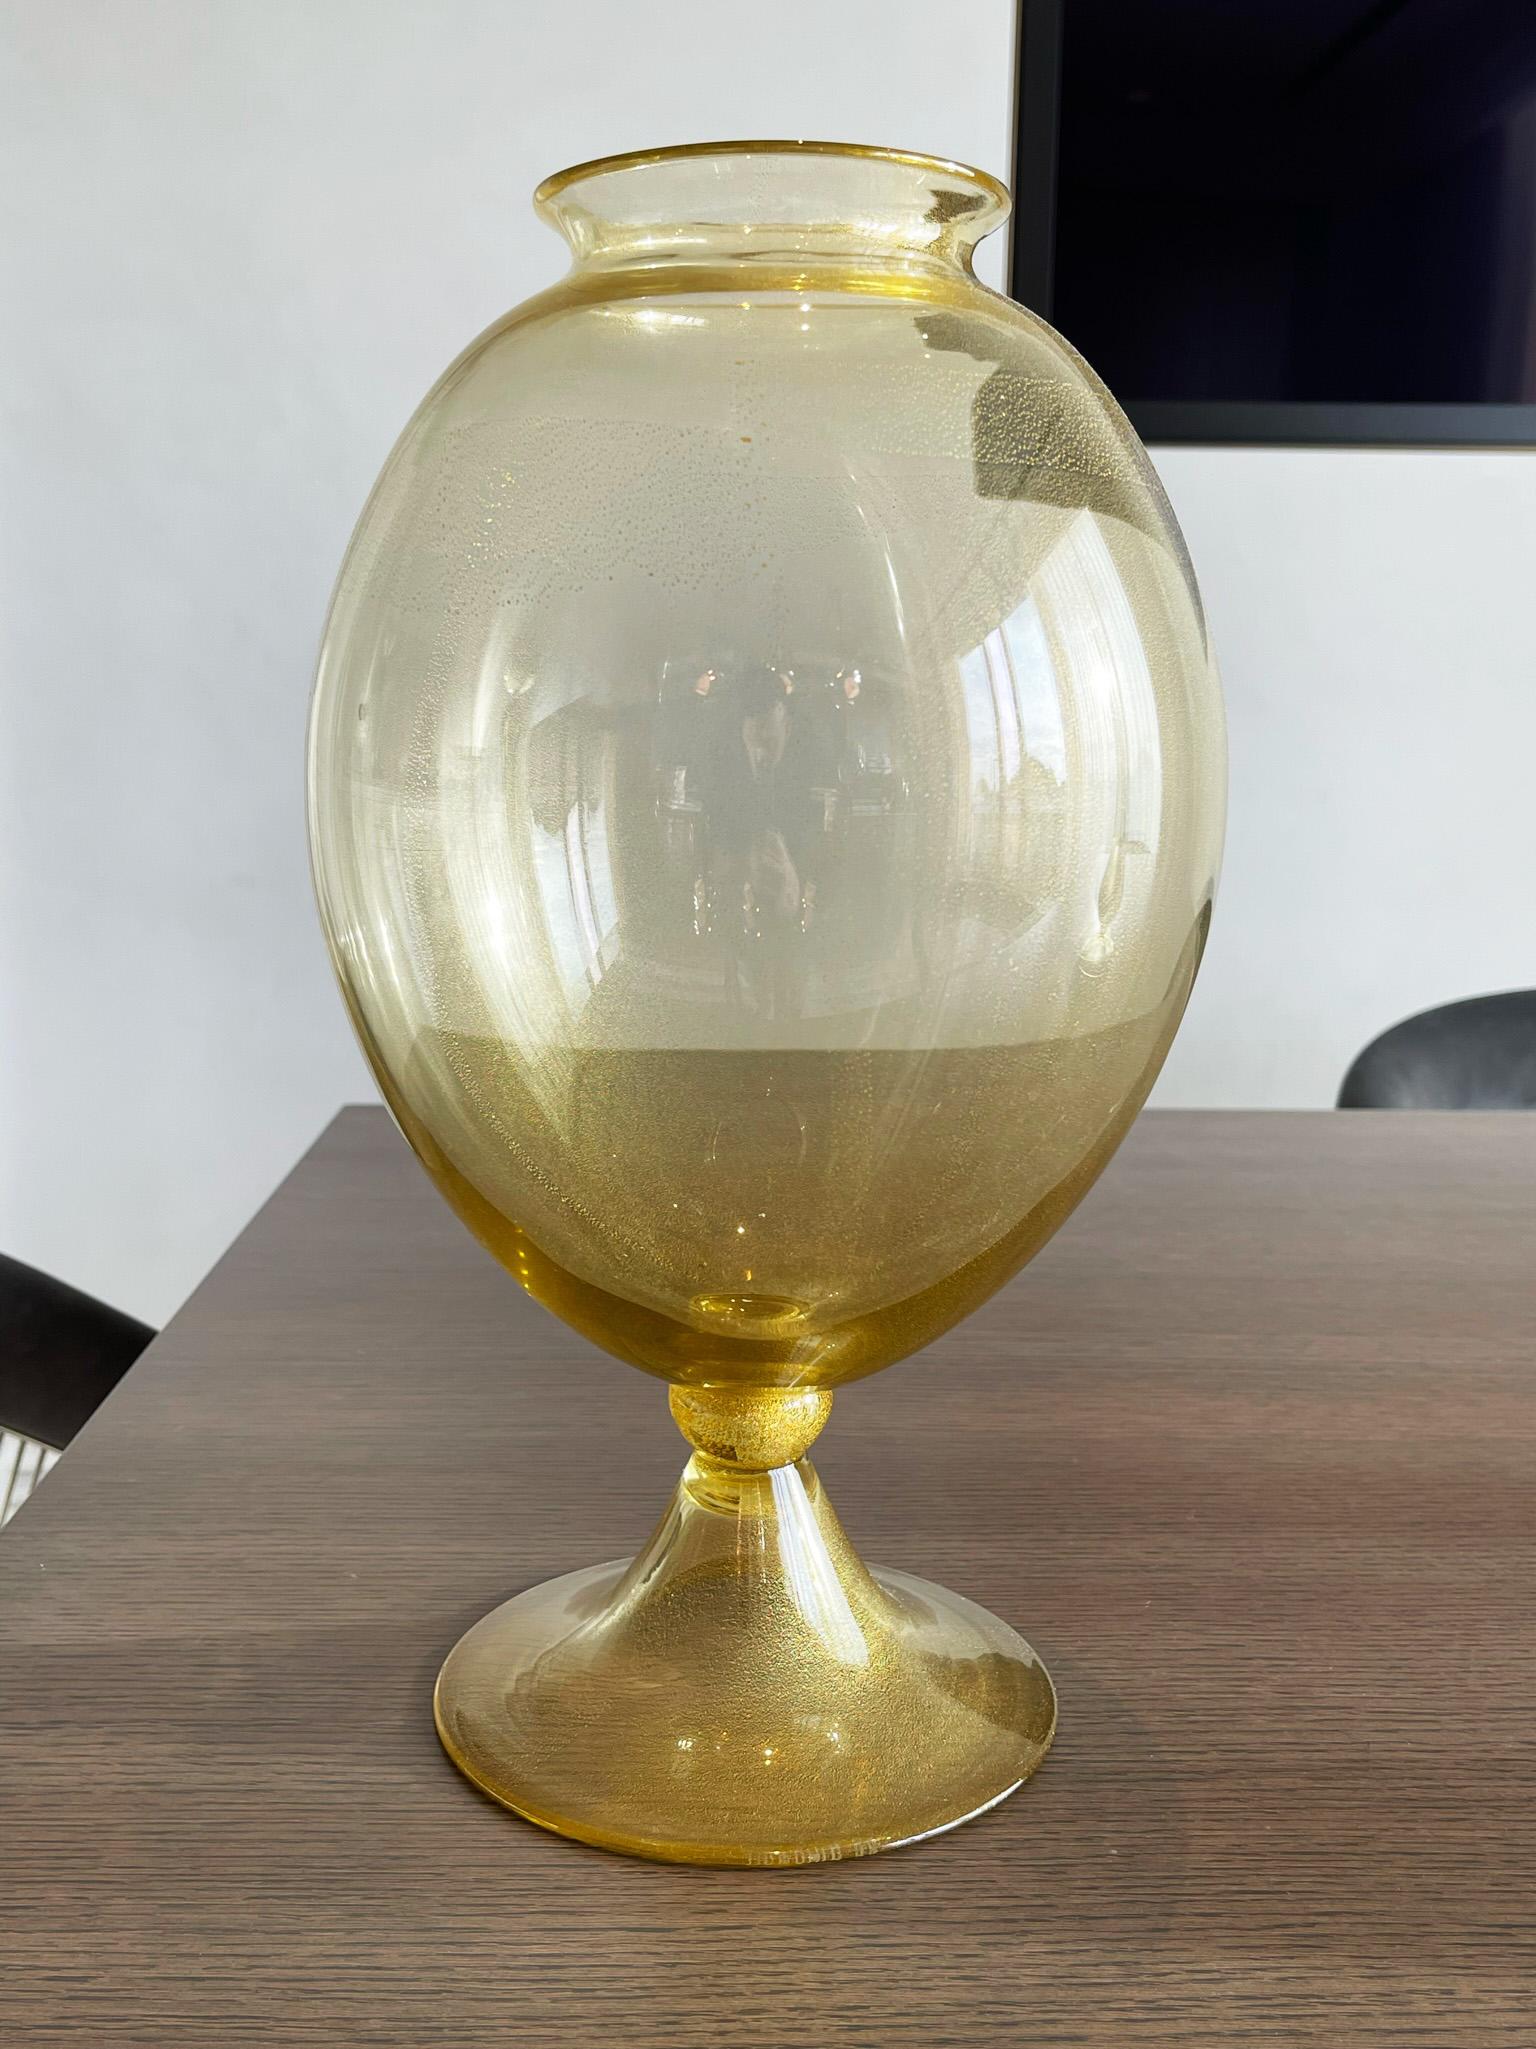 Large Gold  Murano Glass Vase by Seguso, Italy, for Donghia

Discover an exceptional piece of Murano art glass that combines the expertise of the two iconic brands Donghia and Seguso. Handcrafted in Italy with the finest Murano glass, this Seguso